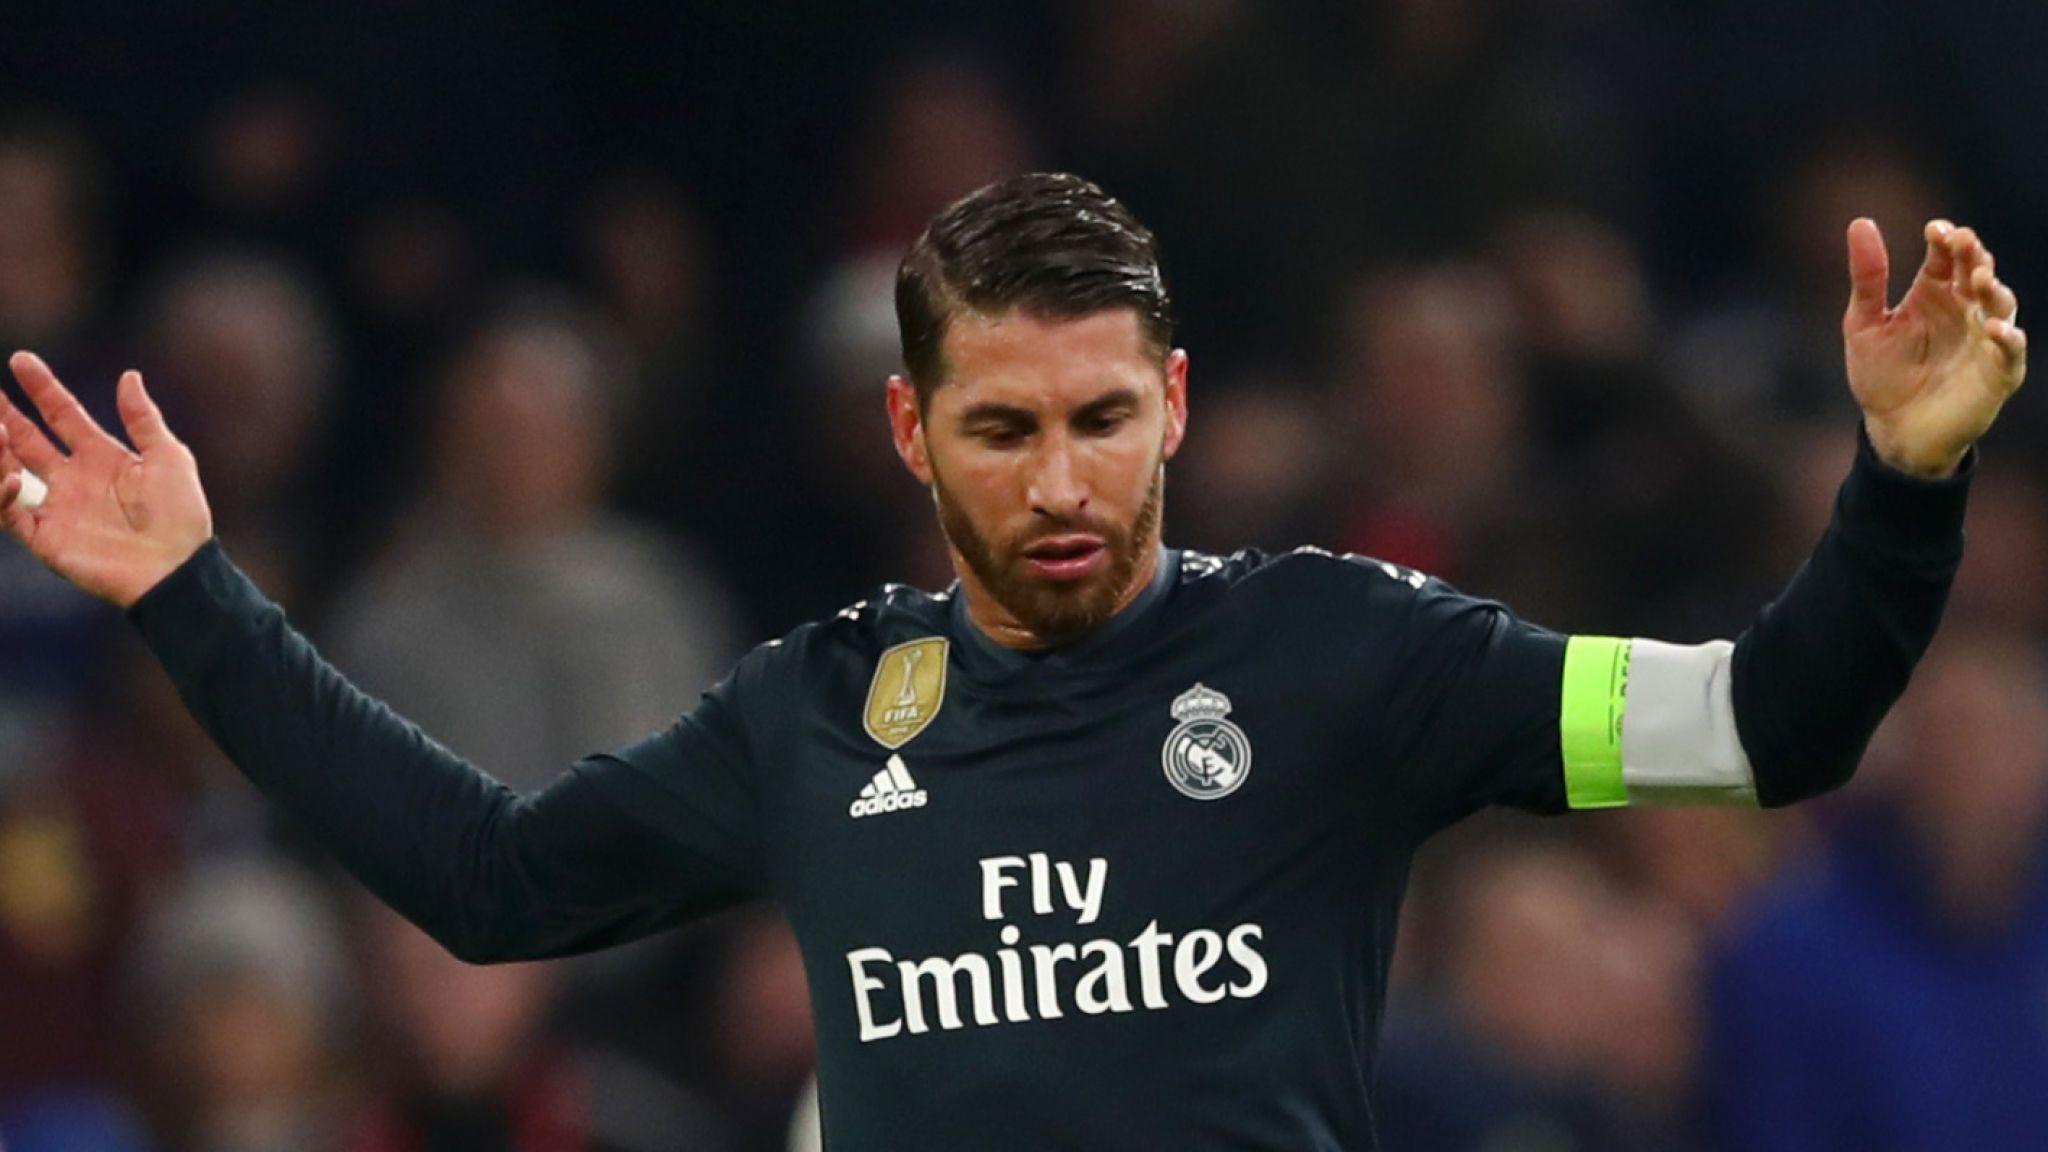 Real Madrid captain Sergio Ramos banned for two European matches